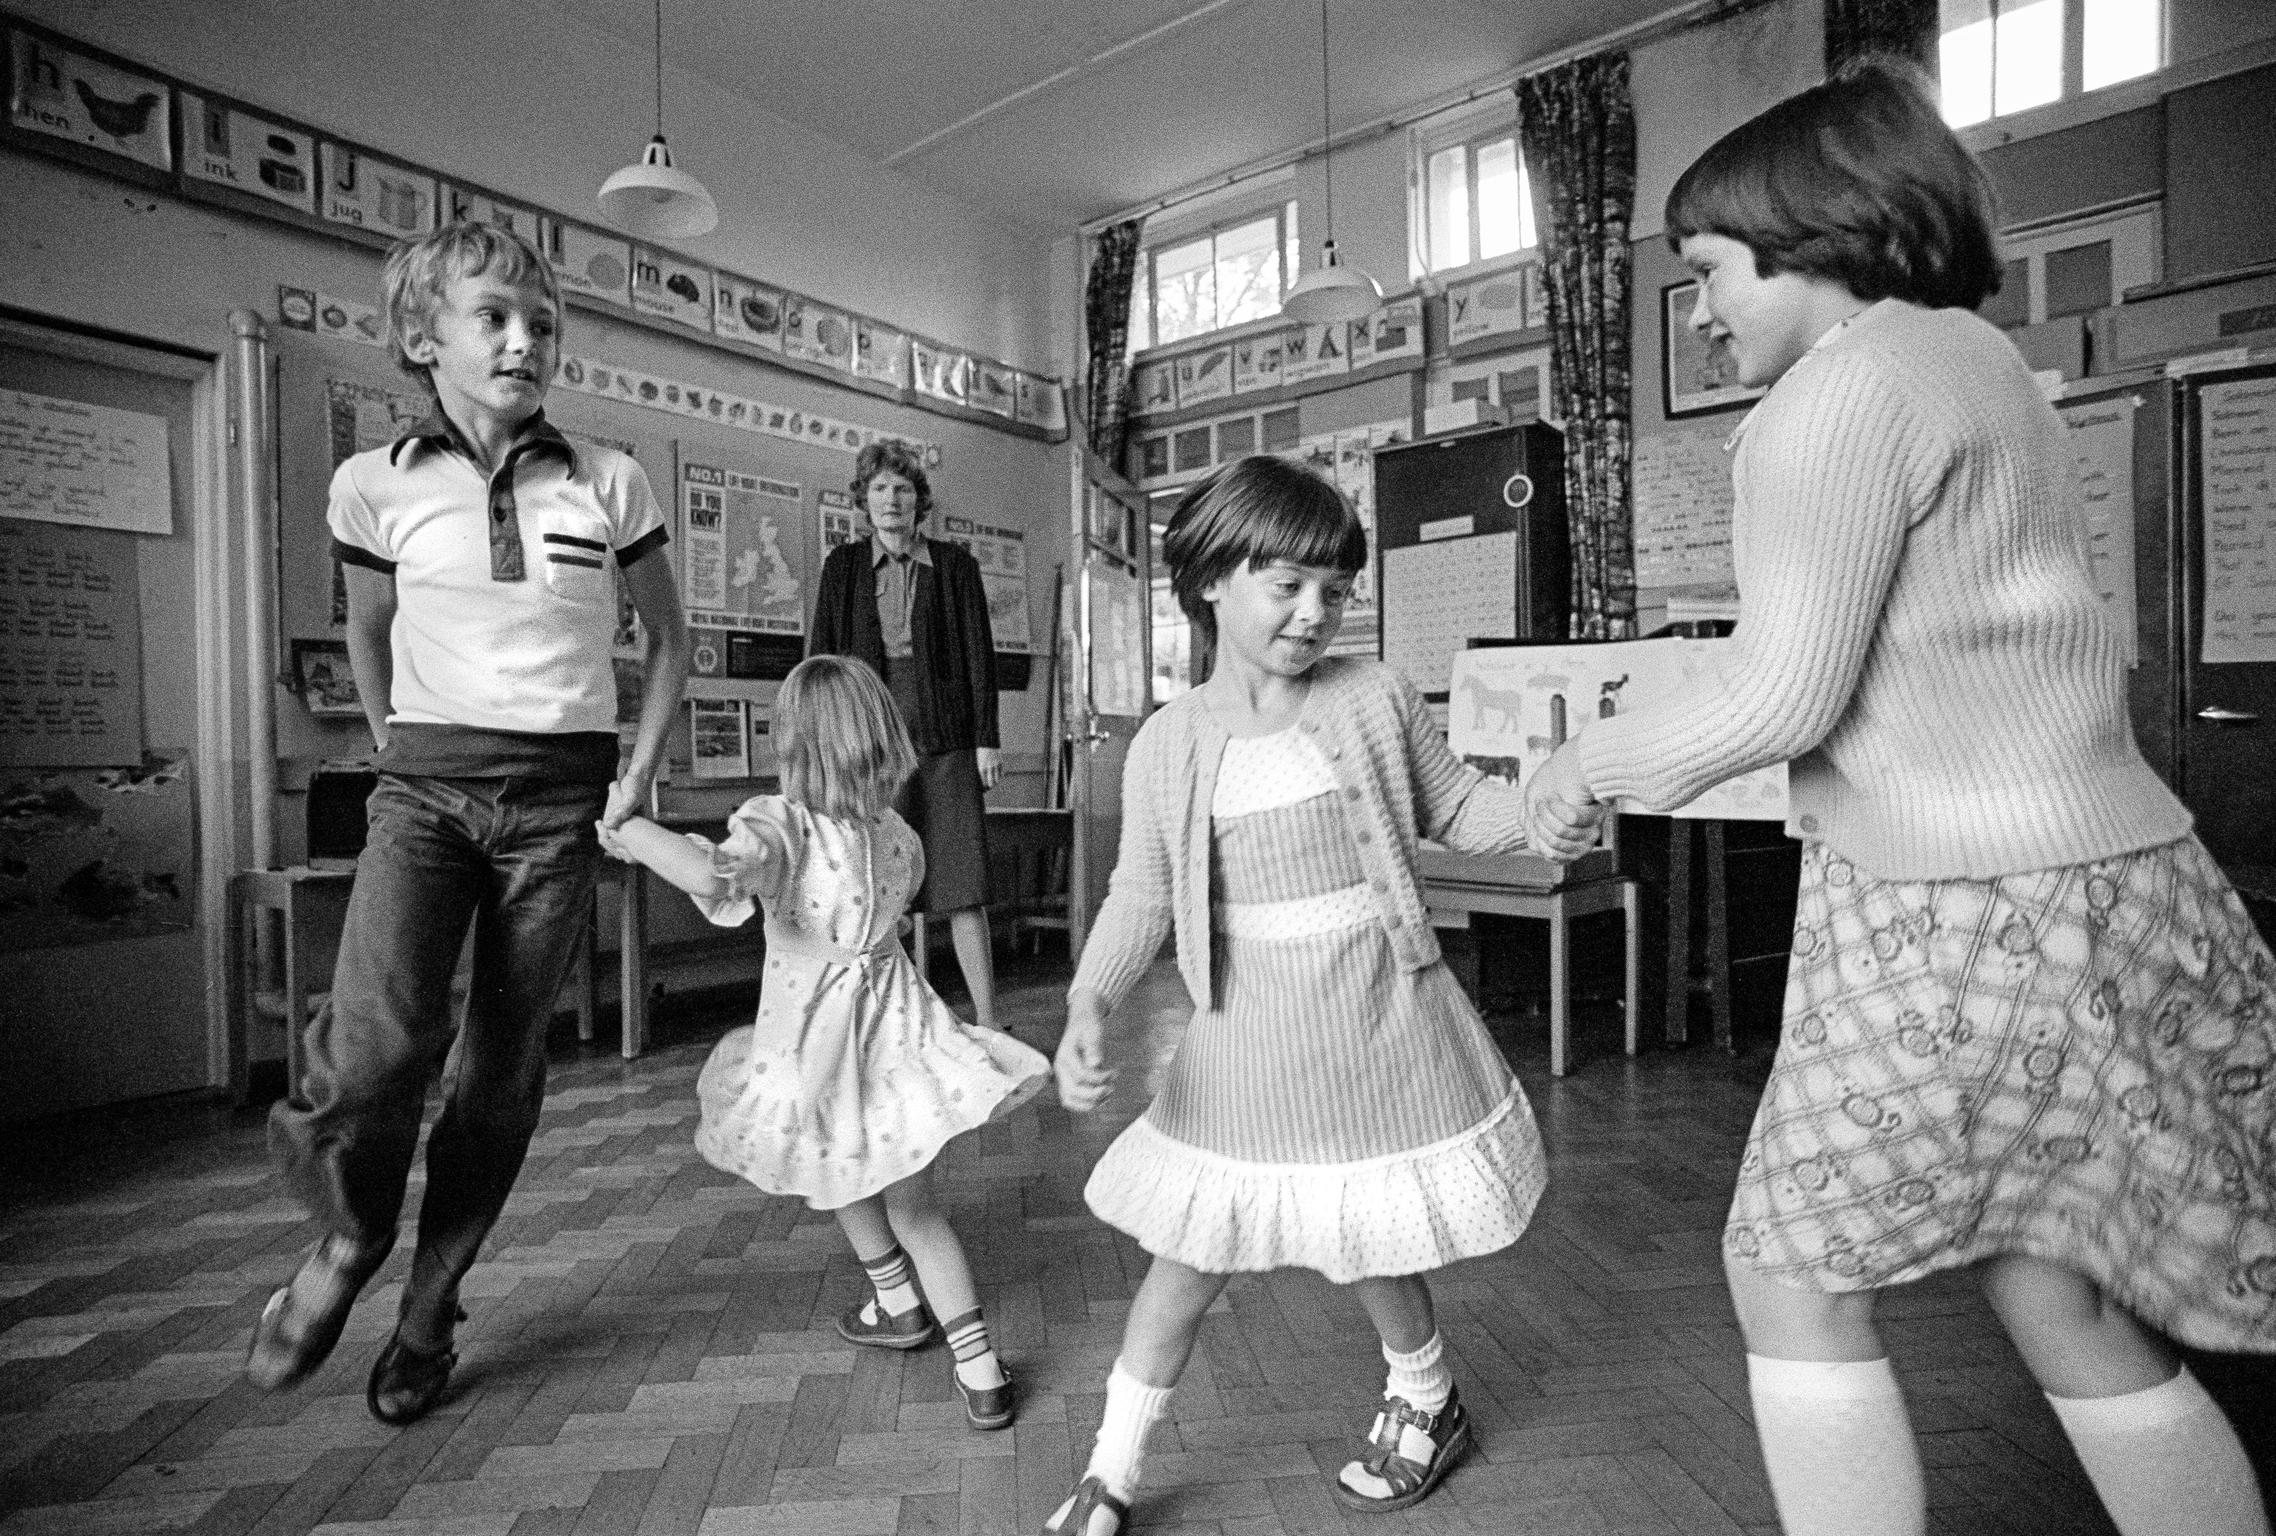 The smallest school in the UK. Four students. Dance class for the whole school. Llaneglwys, Wales